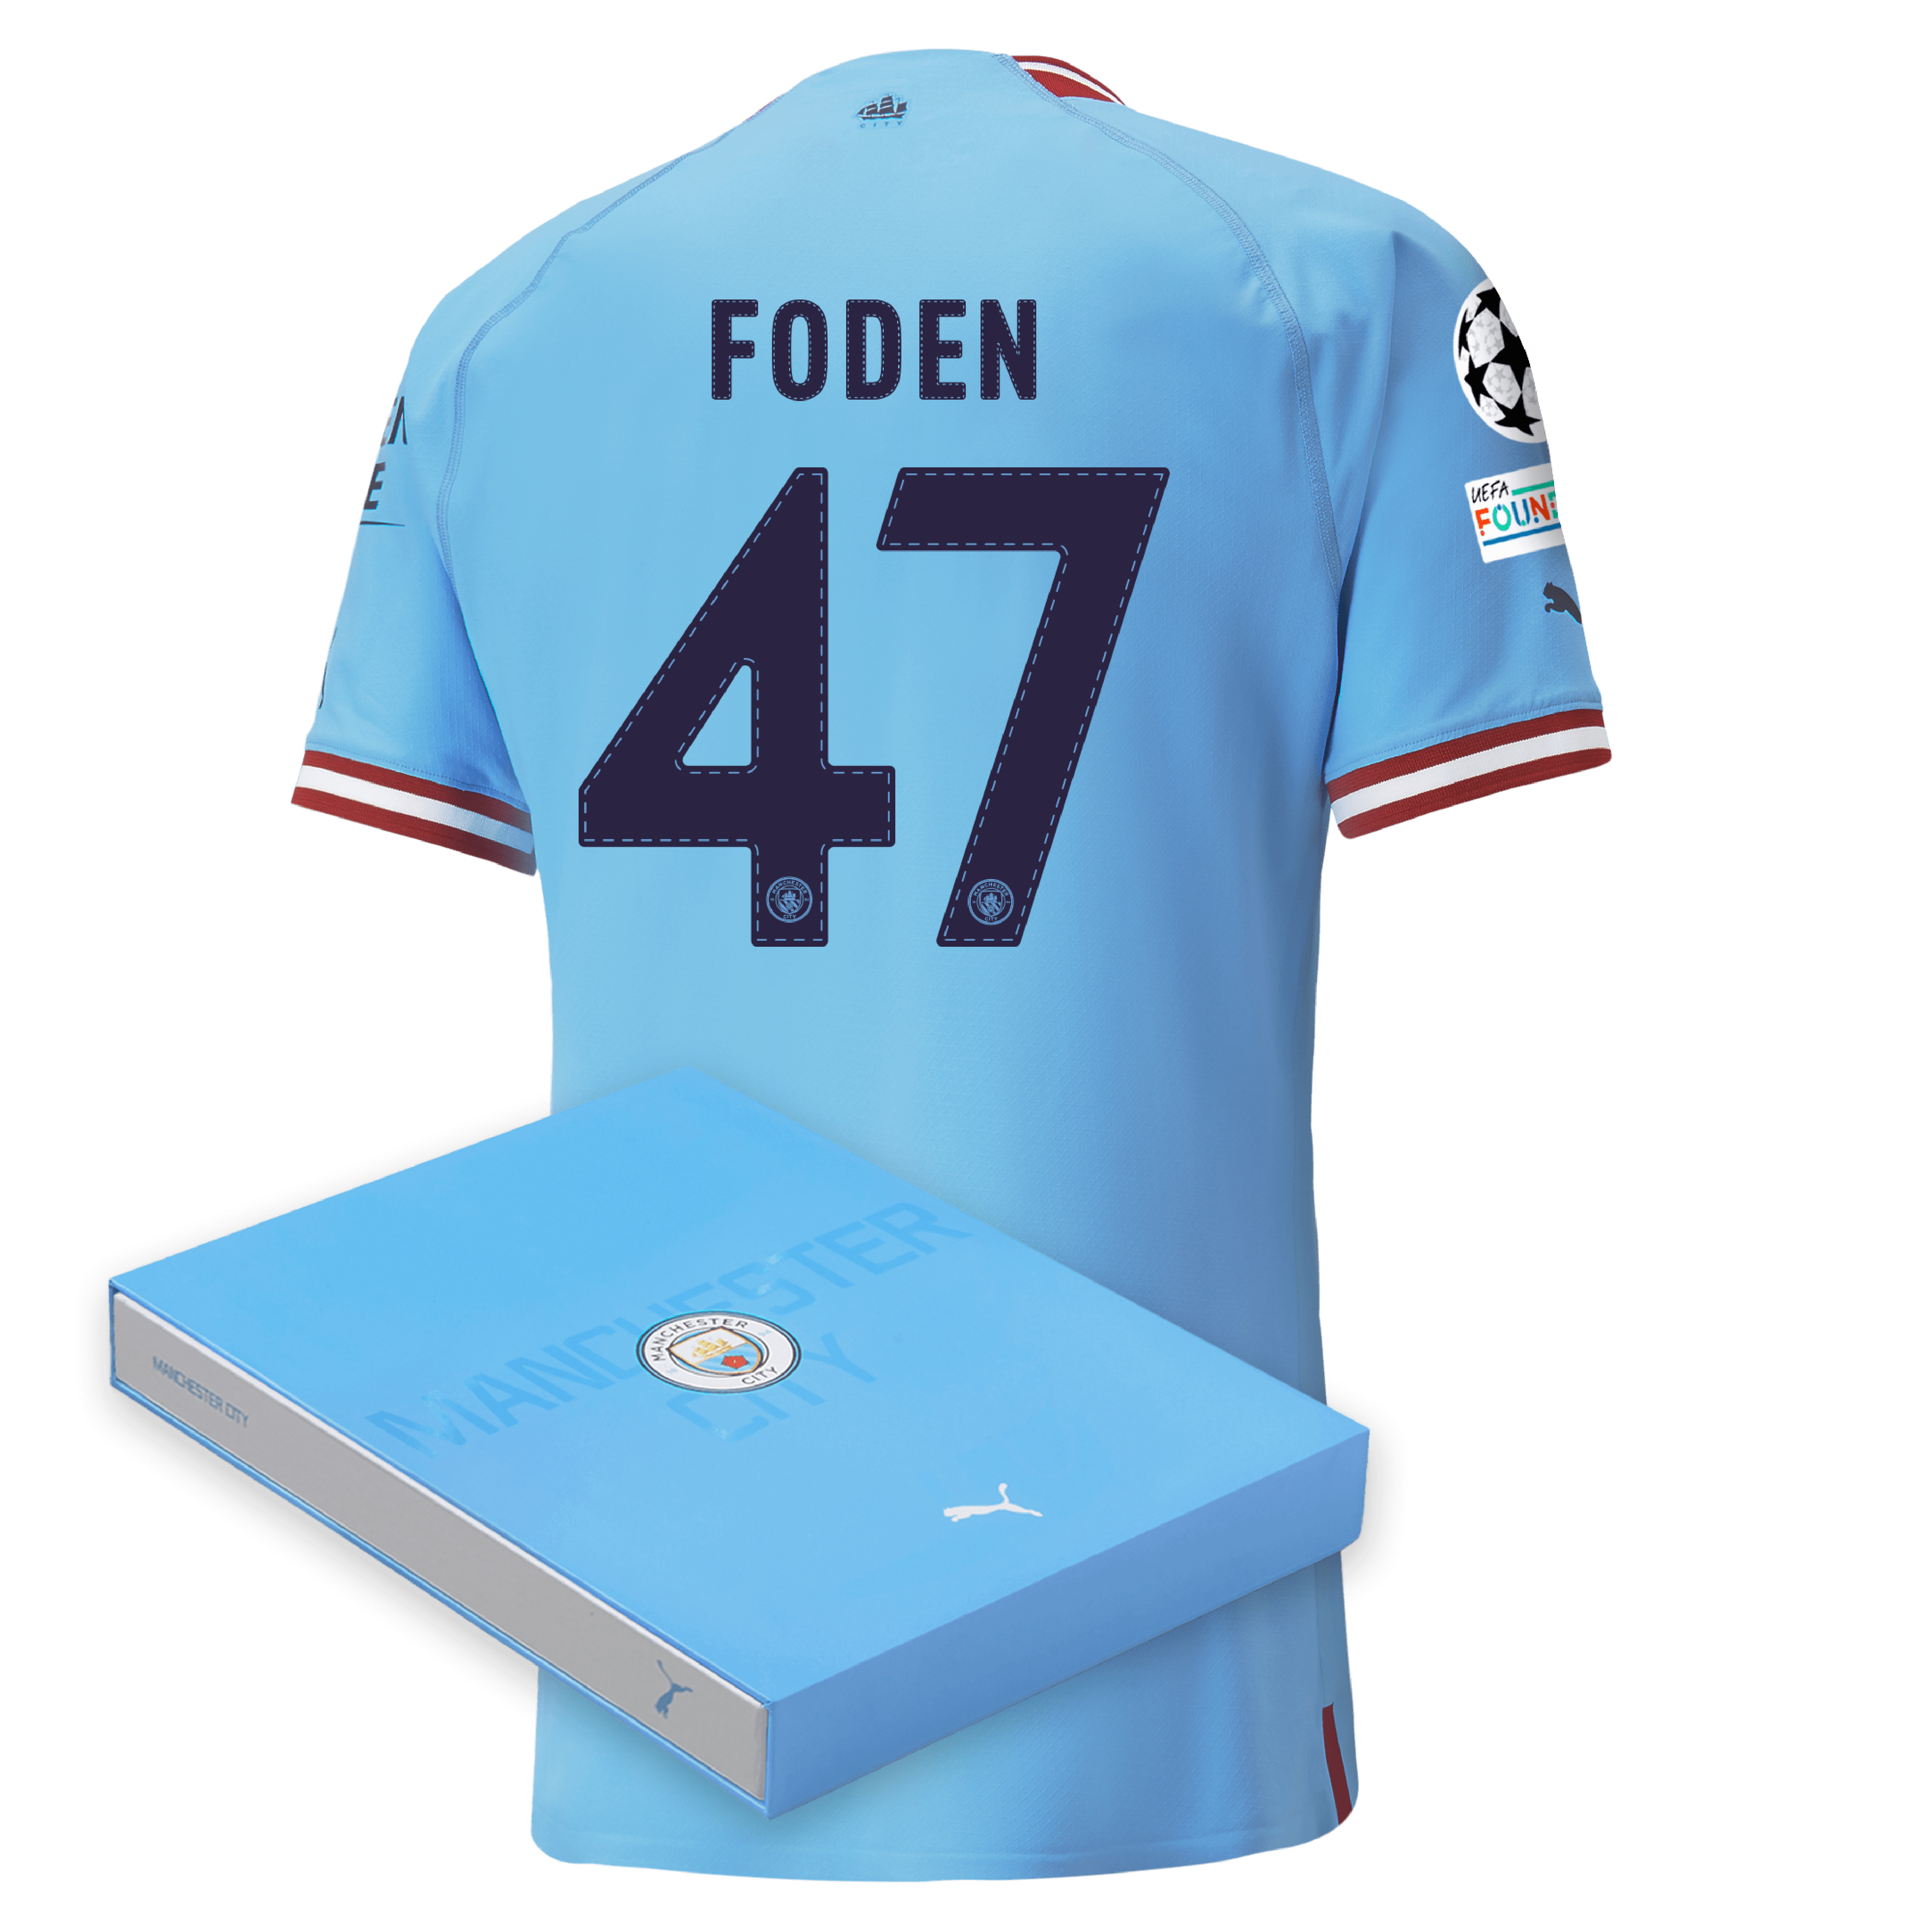 A115 Mens L Manchester City Home Shirt 2020-21 with Foden 47 print 